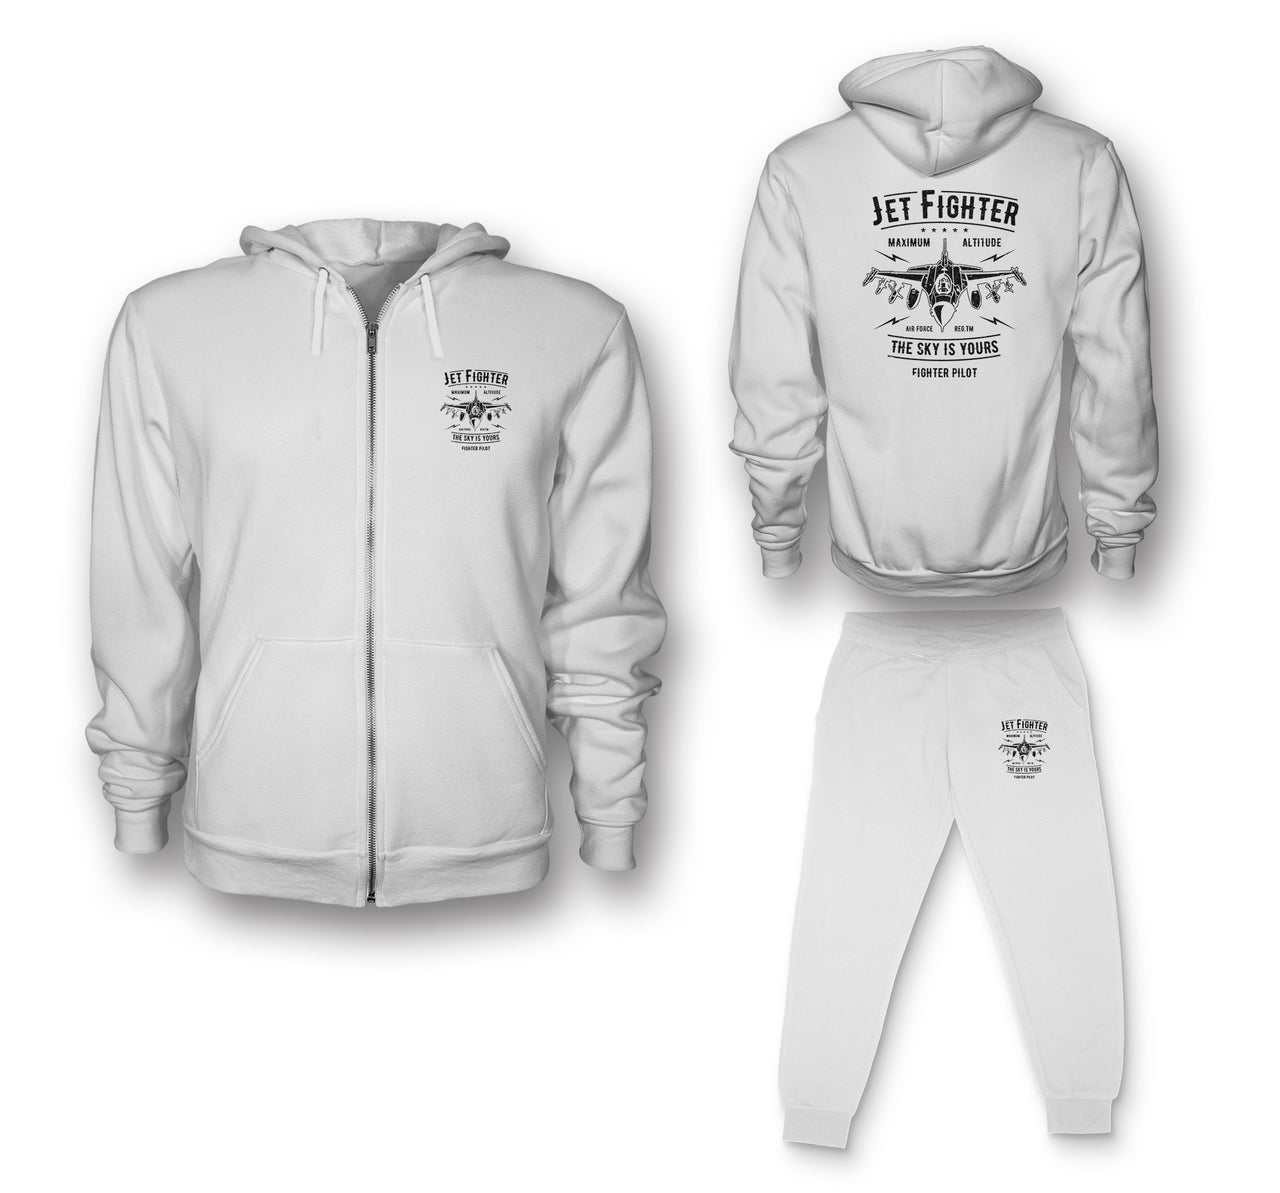 Jet Fighter - The Sky is Yours Designed Zipped Hoodies & Sweatpants Set